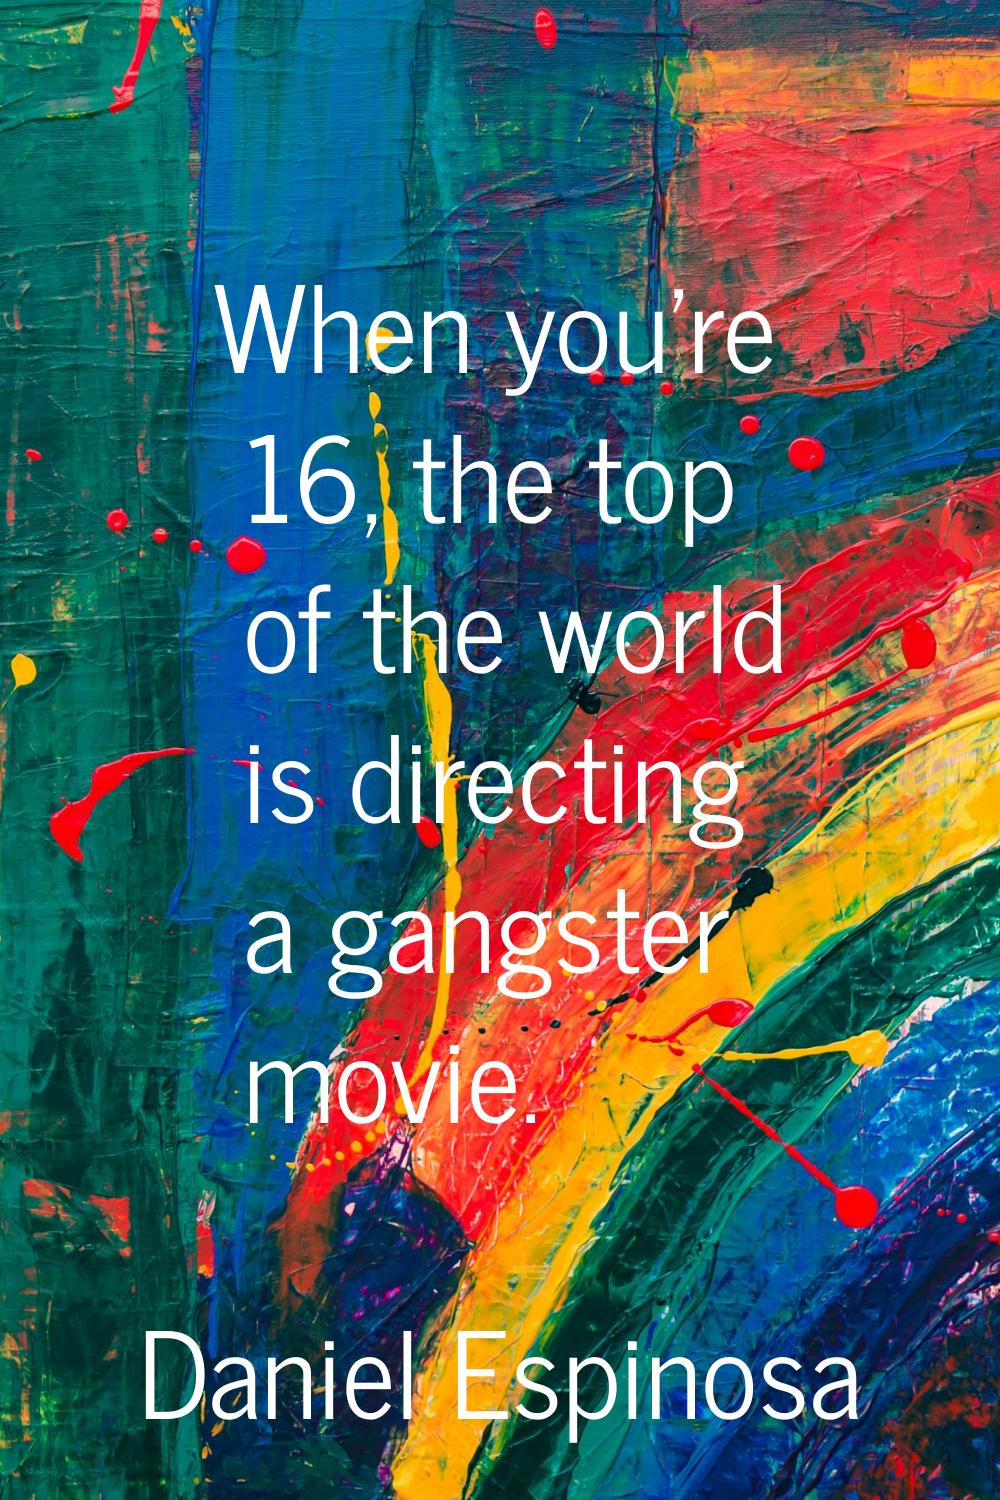 When you're 16, the top of the world is directing a gangster movie.